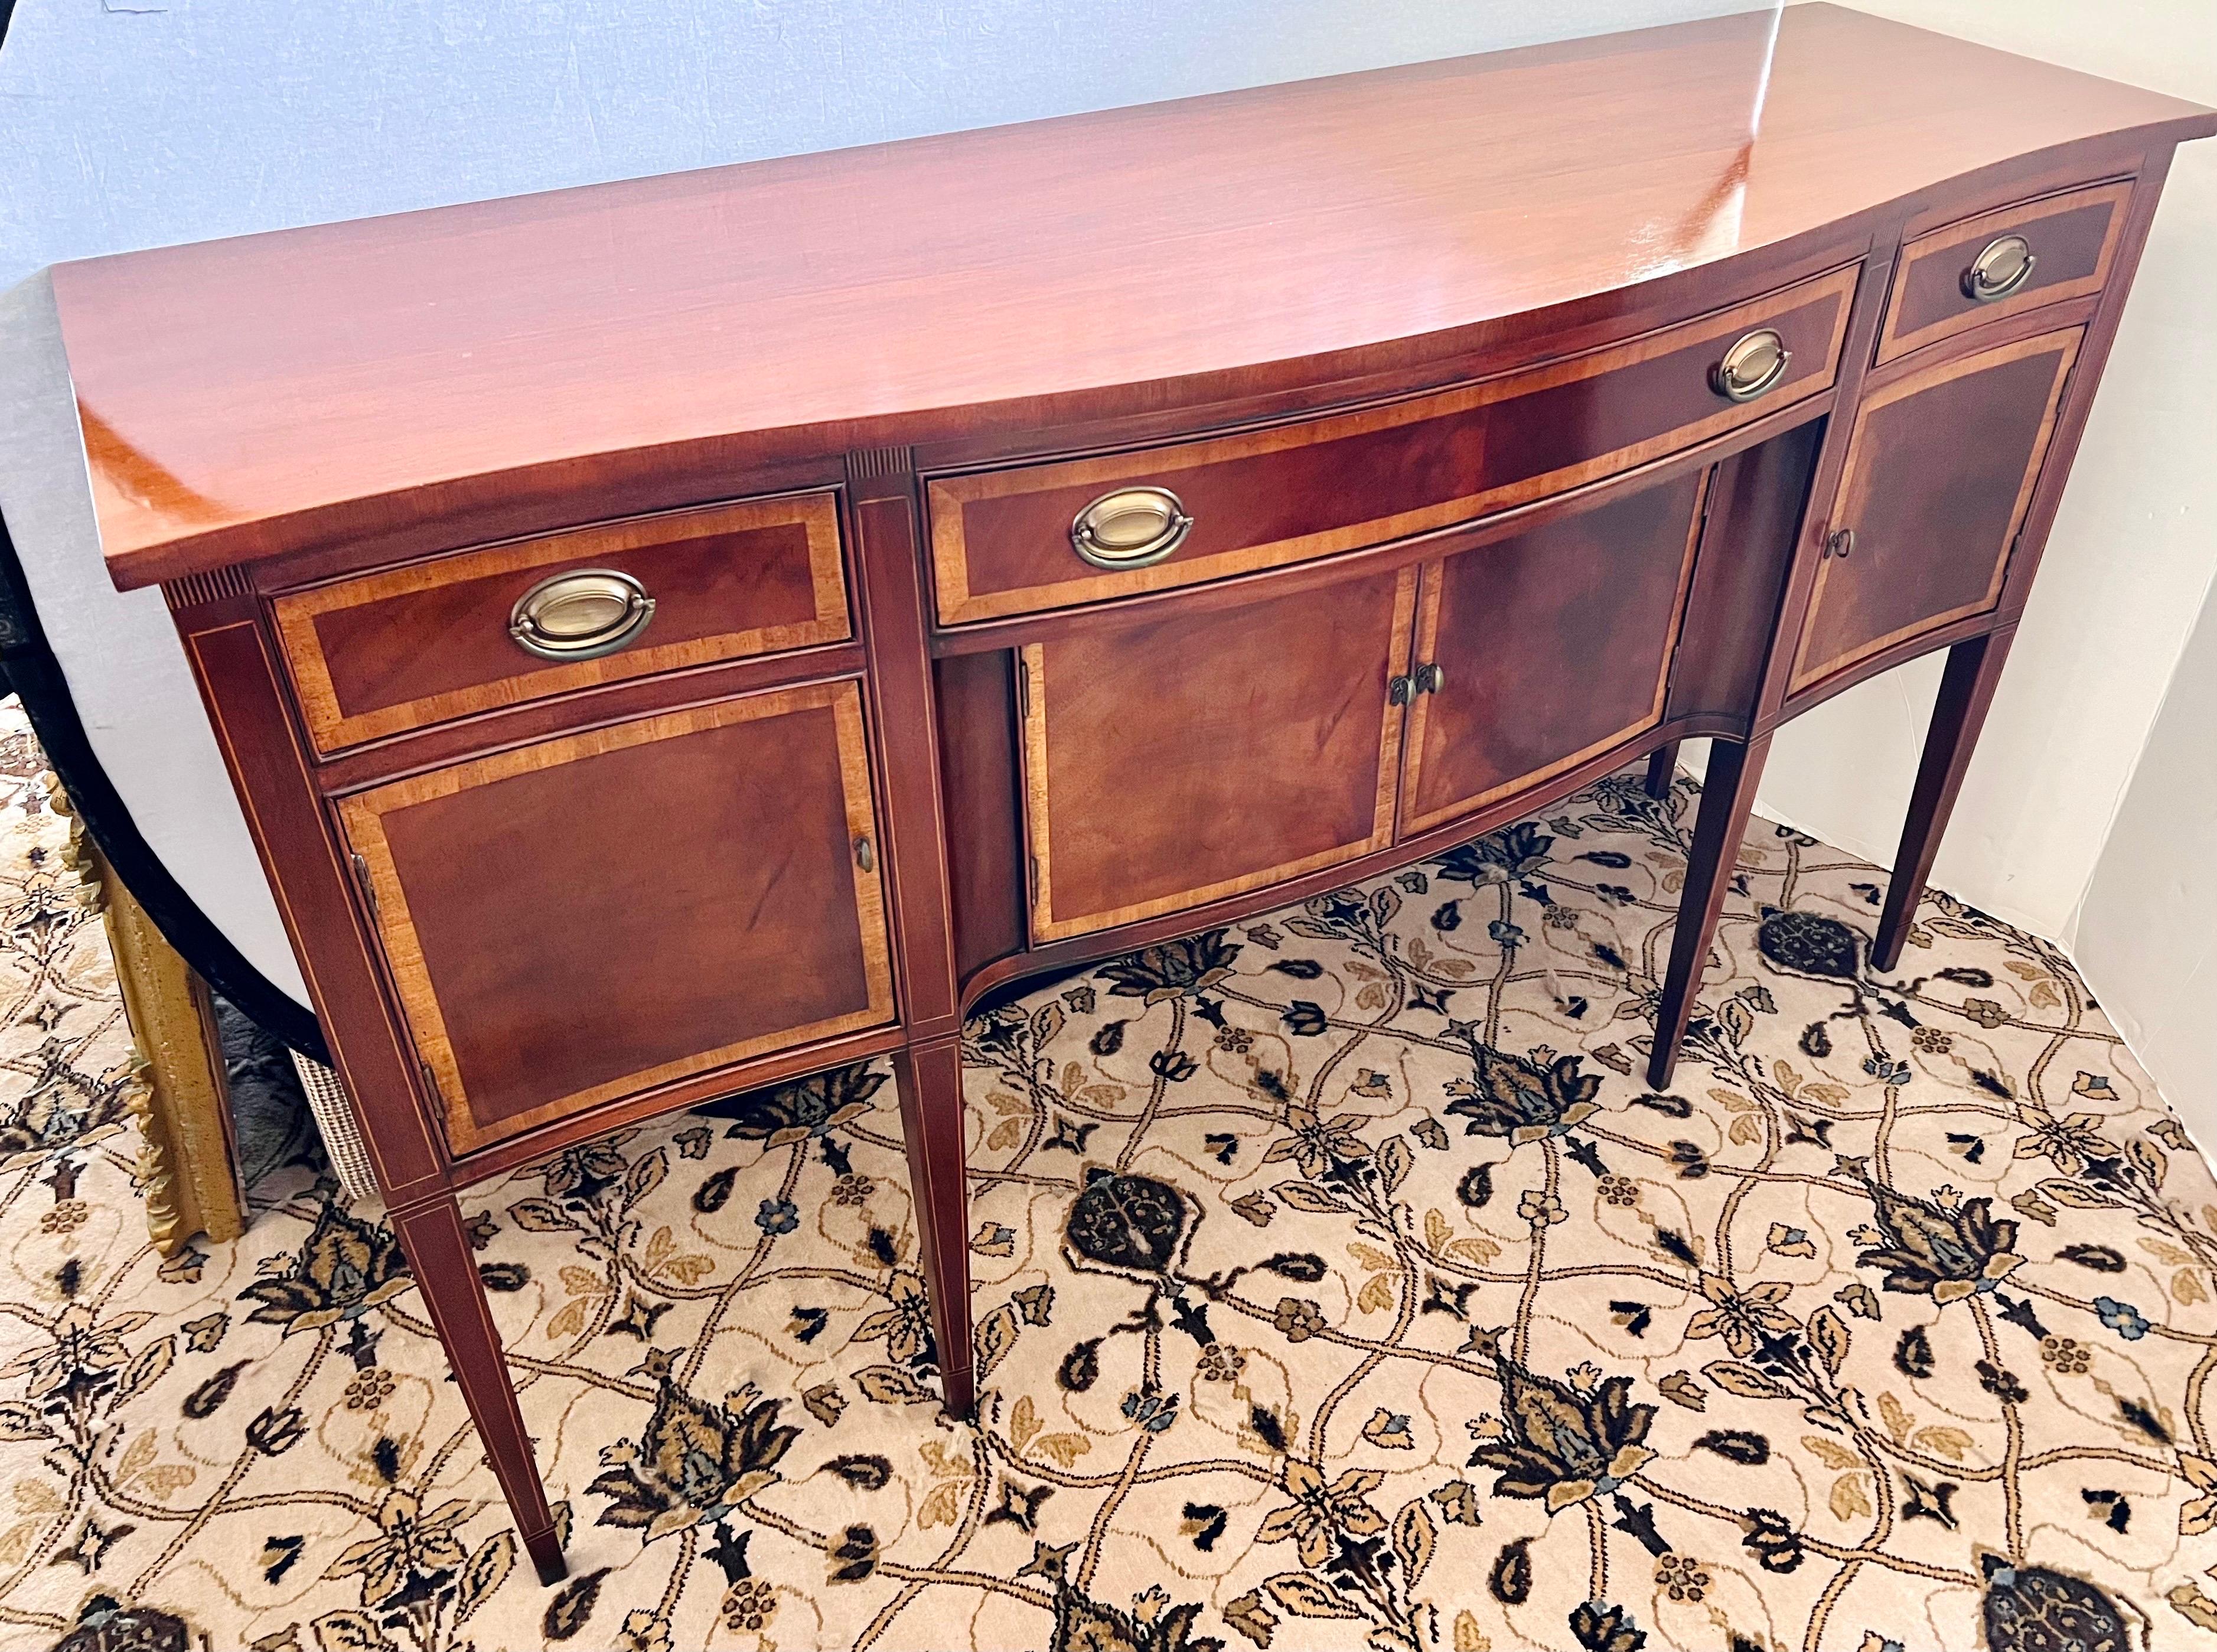 20th Century Mahogany Inlay Sideboard Buffet Server Credenza by Hickory Chair